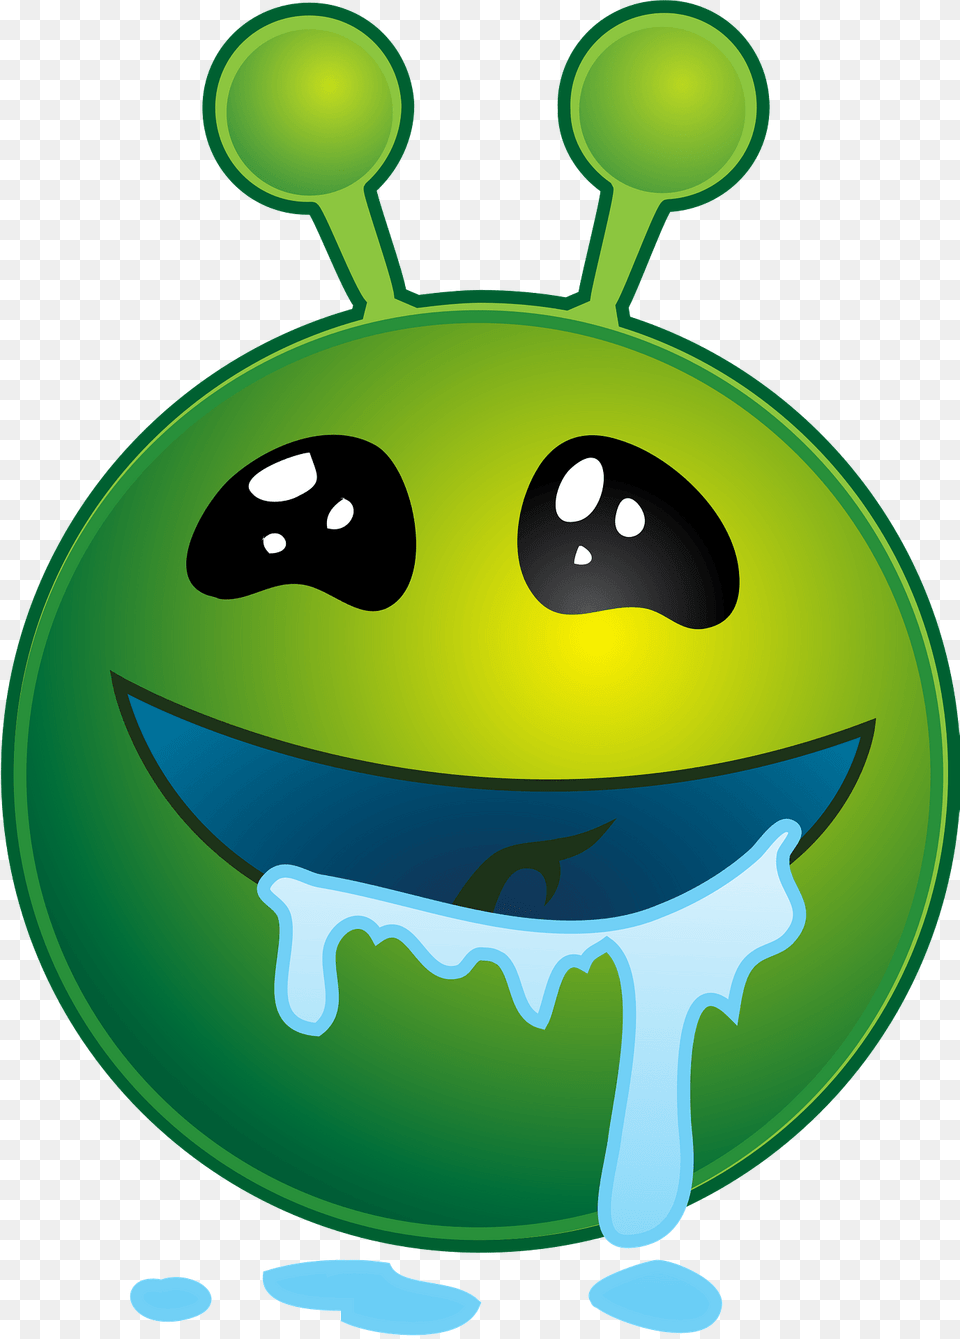 Smiley Green Alien Drooling Clipart, Sphere Png Image